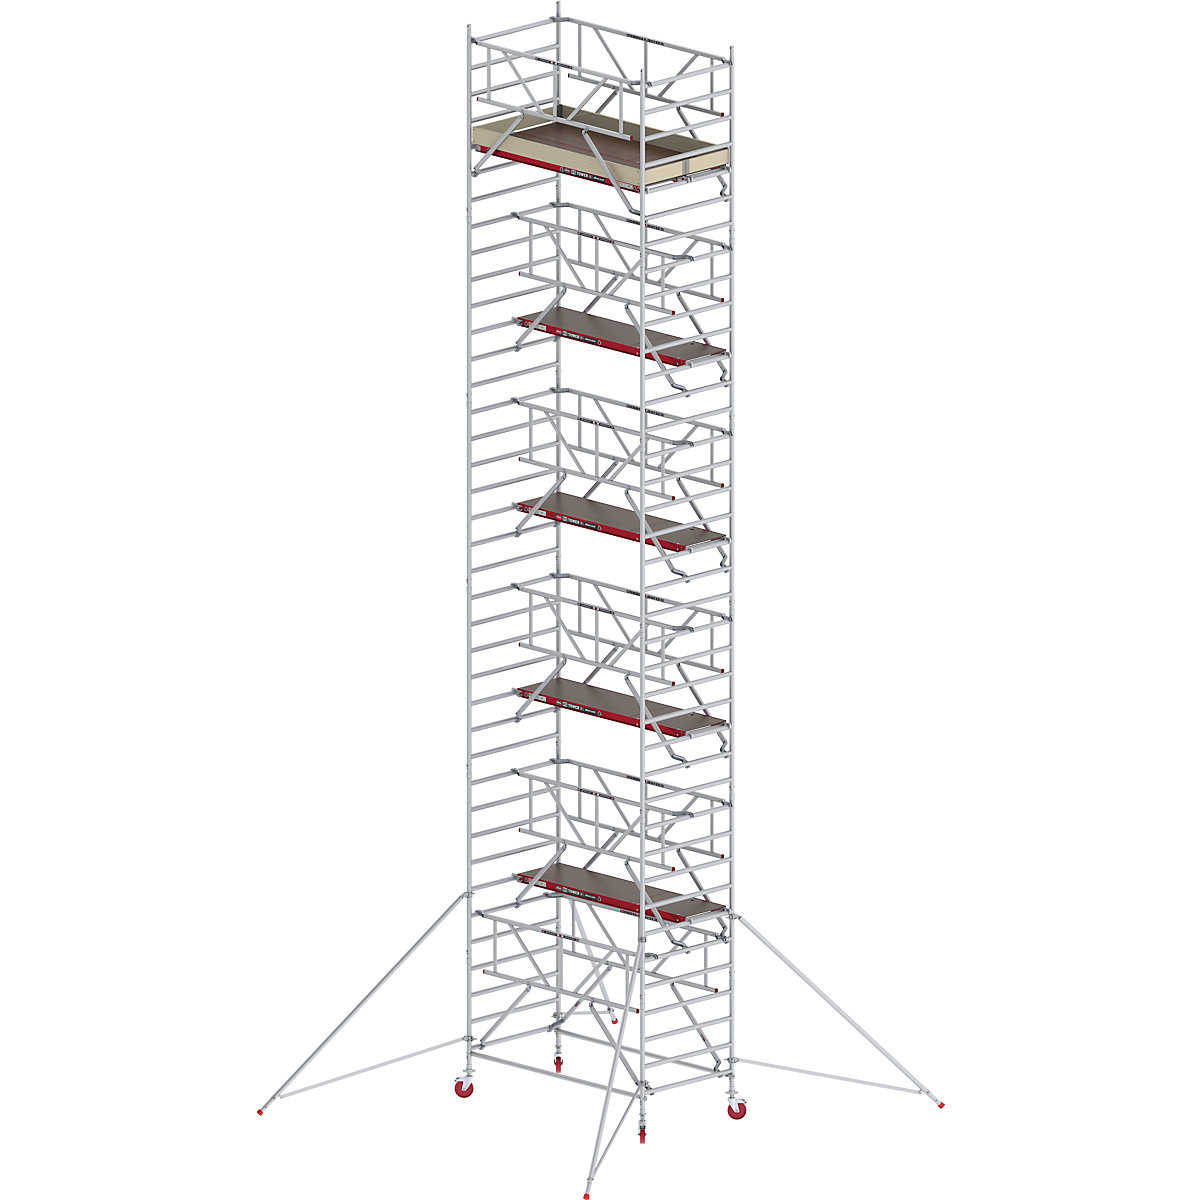 RS TOWER 42 wide mobile access tower with Safe-Quick® – Altrex, wooden platform, length 2.45 m, working height 12.2 m-3